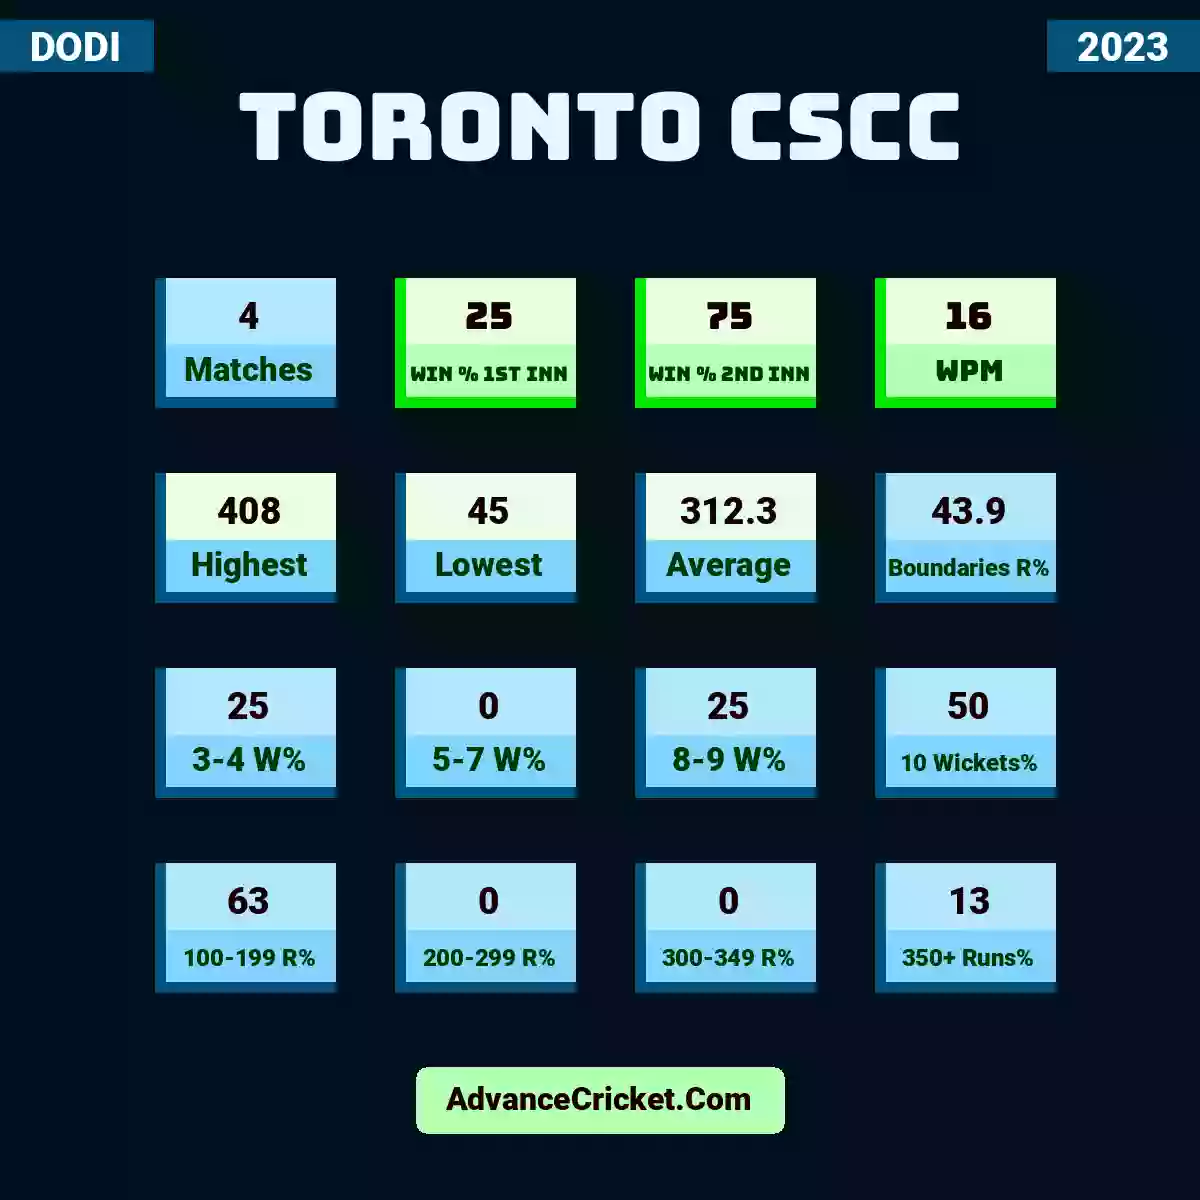 Image showing Toronto CSCC with Matches: 4, Win % 1st Inn: 25, Win % 2nd Inn: 75, WPM: 16, Highest: 408, Lowest: 45, Average: 312.3, Boundaries R%: 43.9, 3-4 W%: 25, 5-7 W%: 0, 8-9 W%: 25, 10 Wickets%: 50, 100-199 R%: 63, 200-299 R%: 0, 300-349 R%: 0, 350+ Runs%: 13.